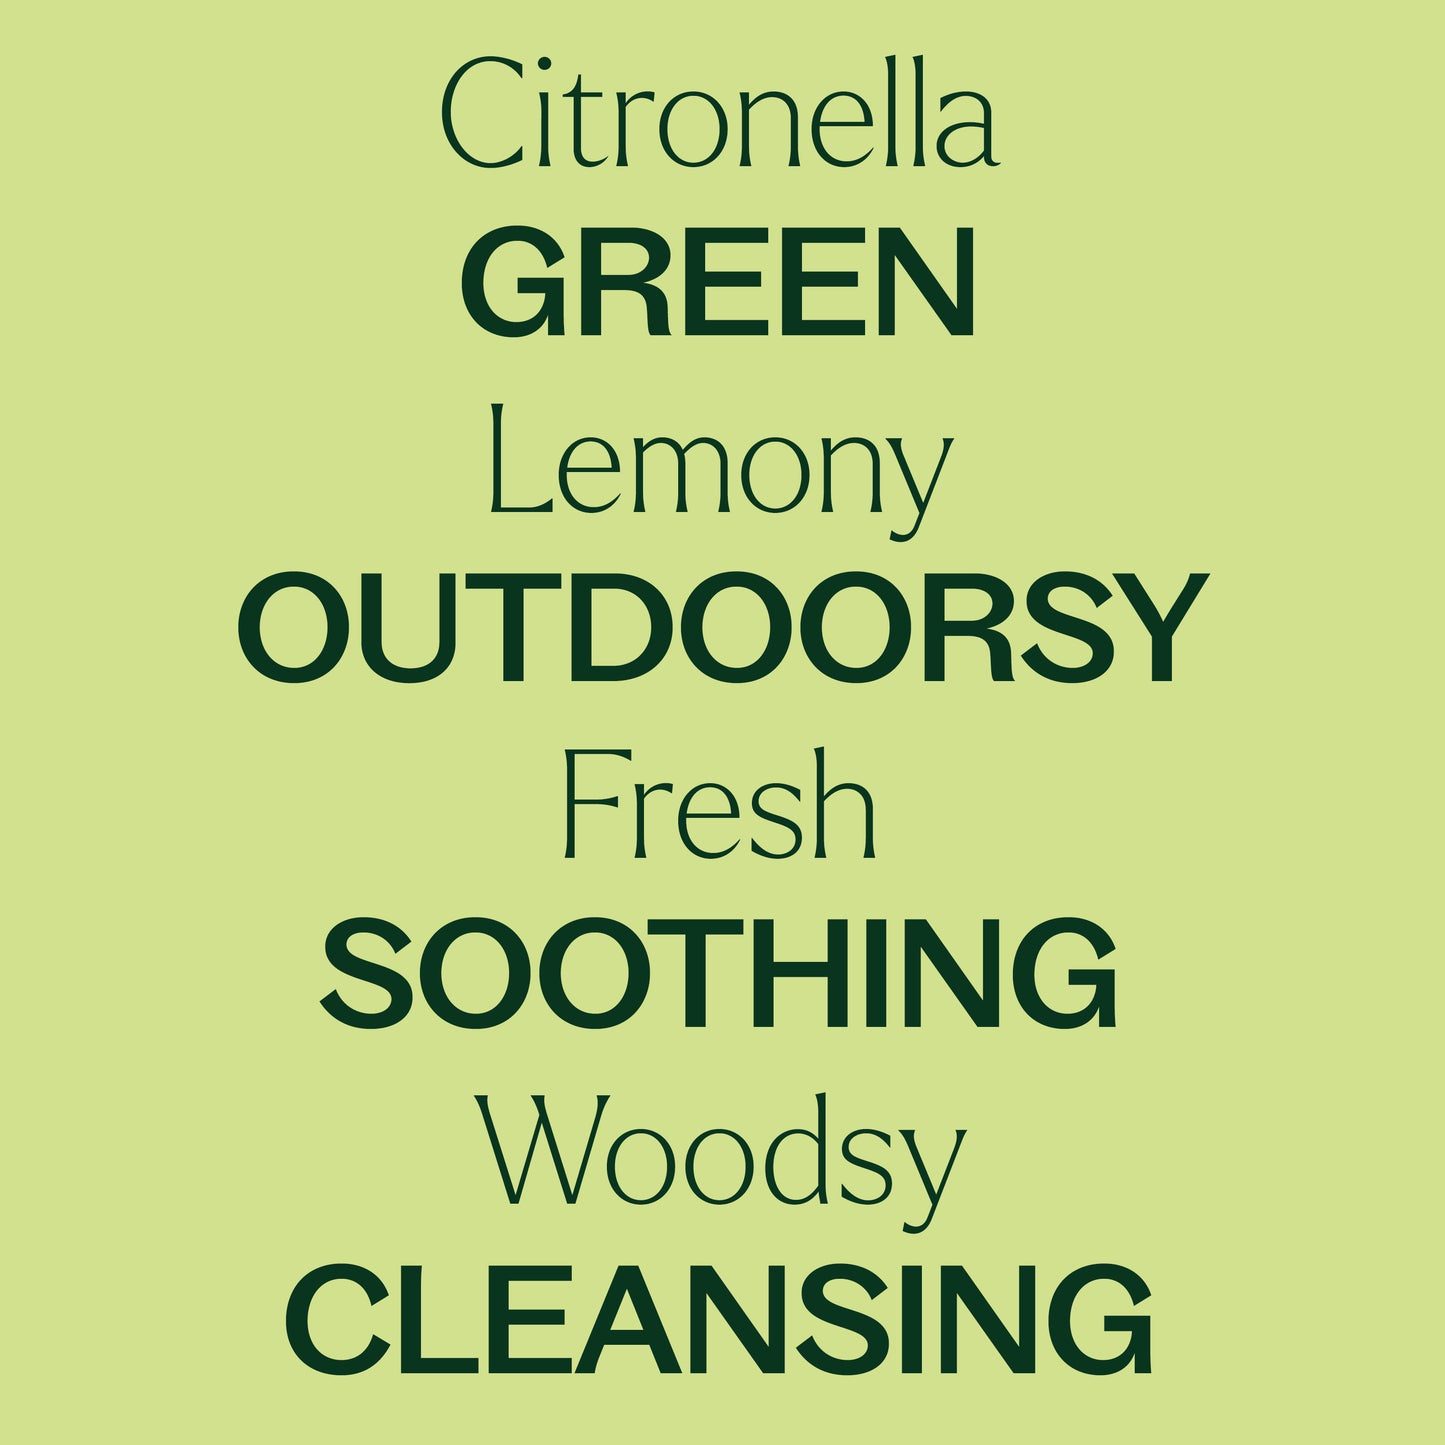 Key features Citronella Essential Oil: green, lemony, outdoorsy, fresh, soothing, woodsy, cleasnsing